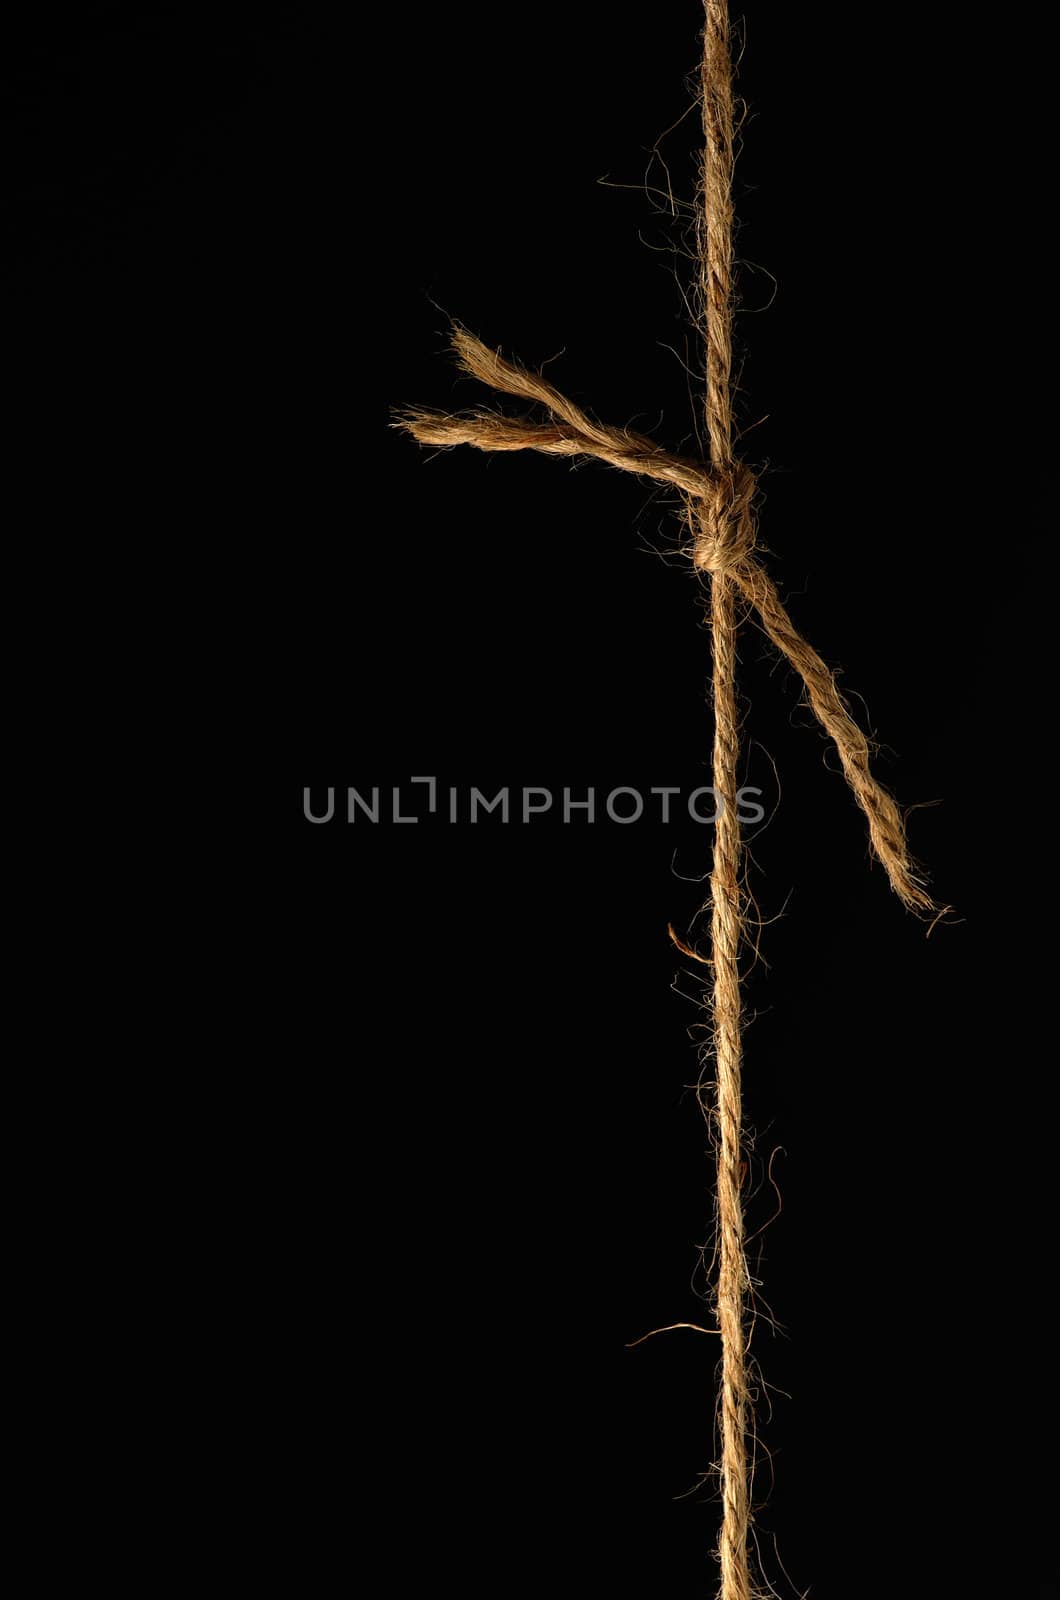 ropewrap with blow on black background